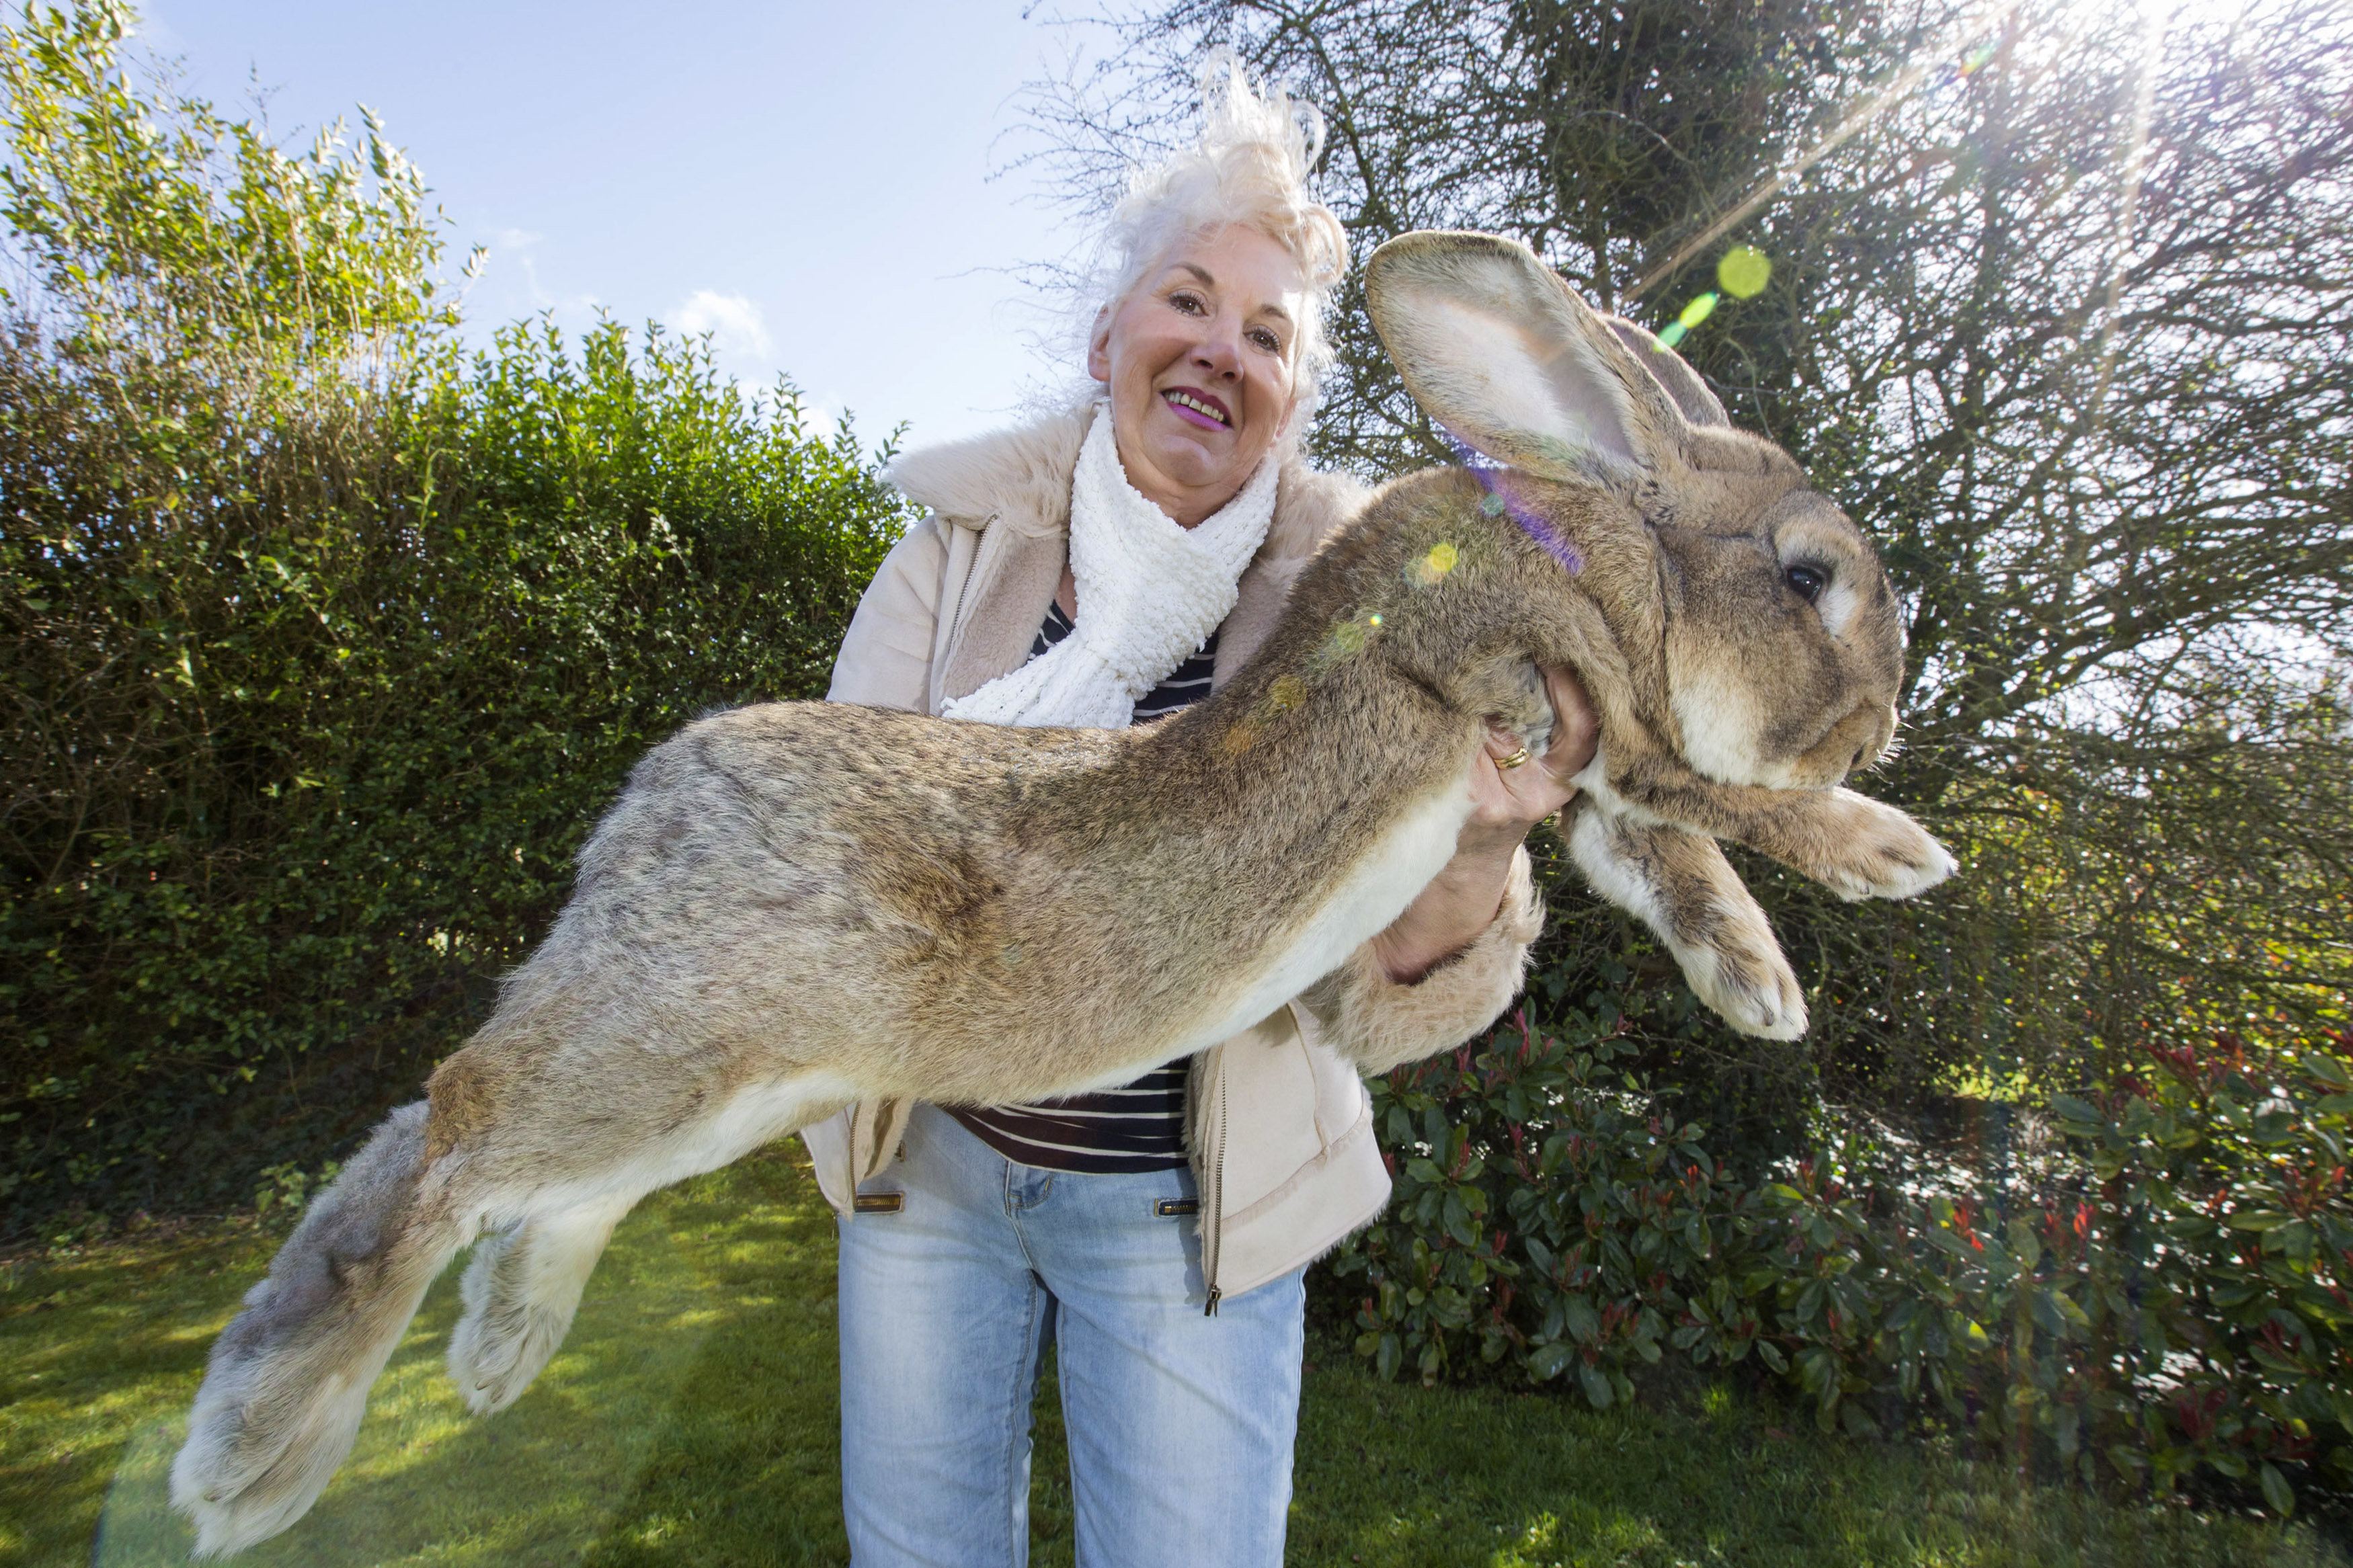 Giant Rabbits Make Excellent Pets, Just 